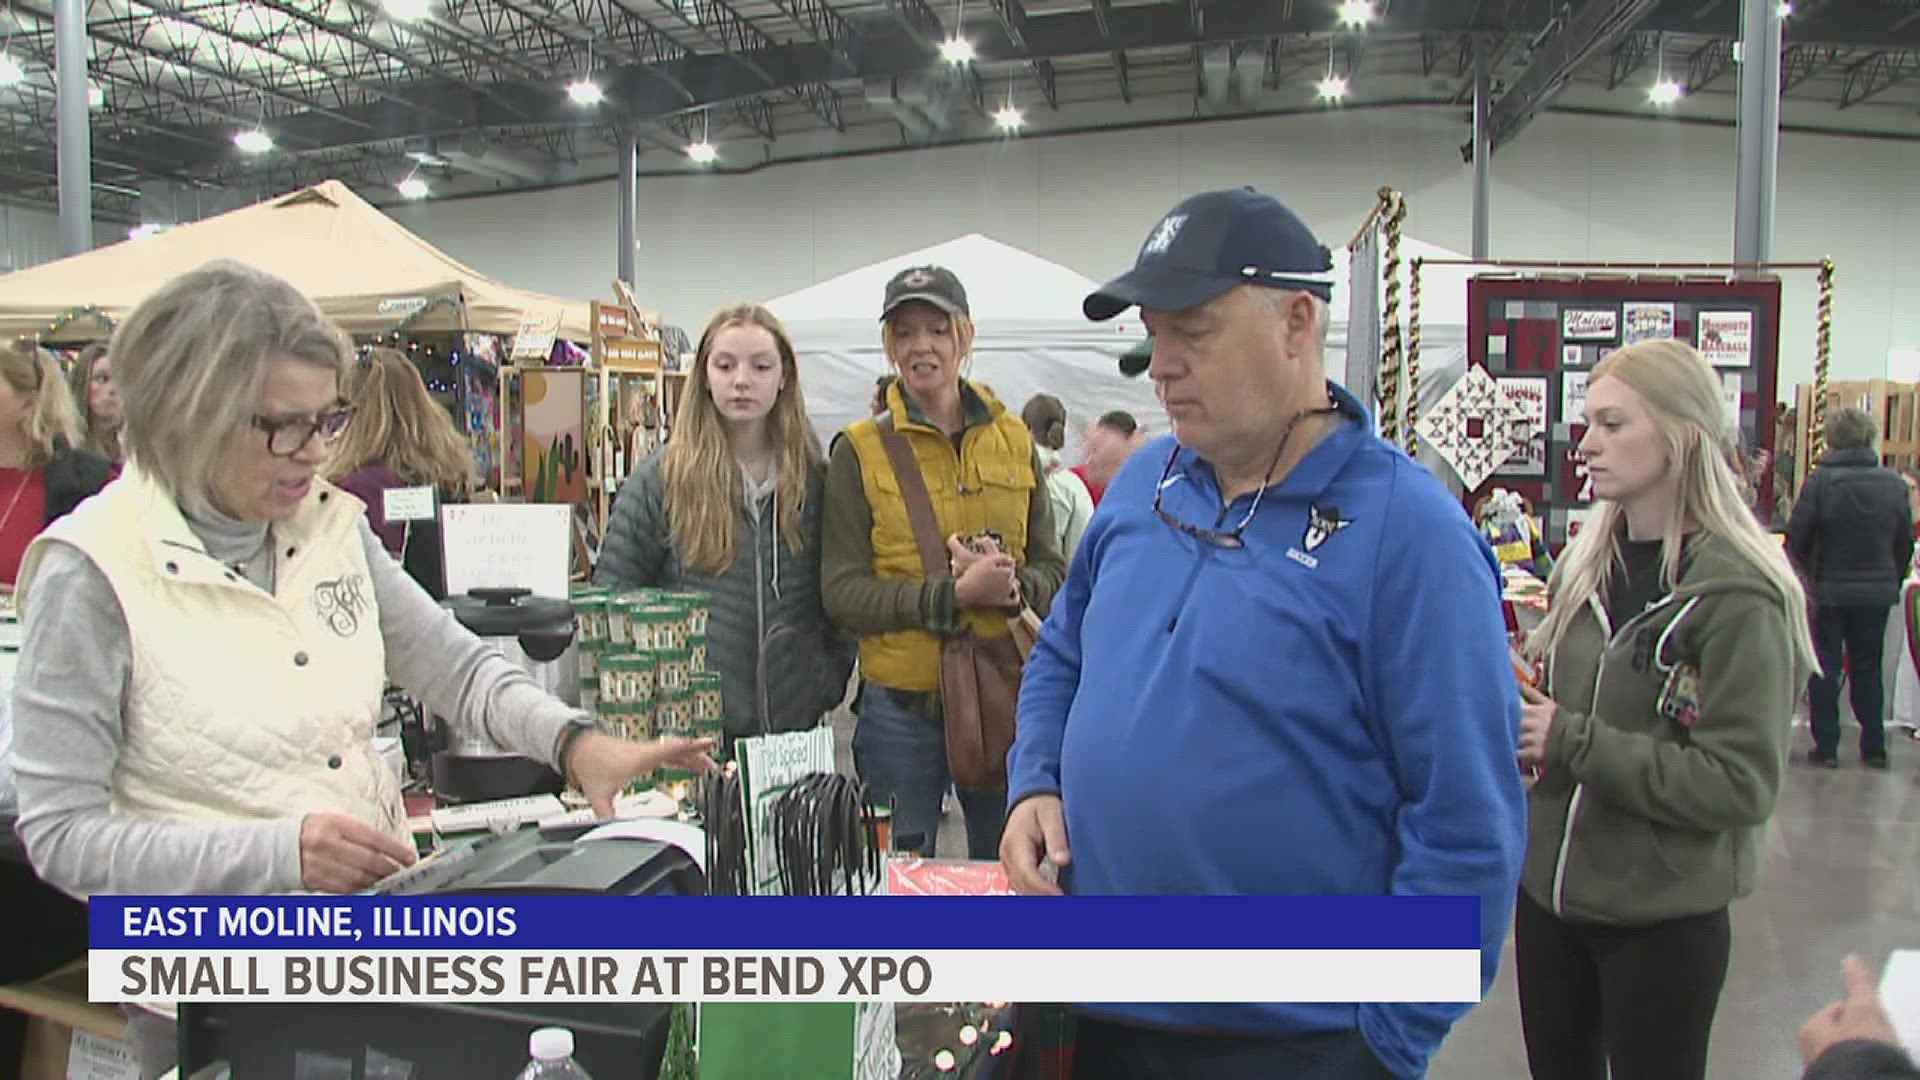 The "Made Market" small business and home vendor fair came to East Moline's Bend XPO Center, where hundreds of small businesses set up shop to sell their products.